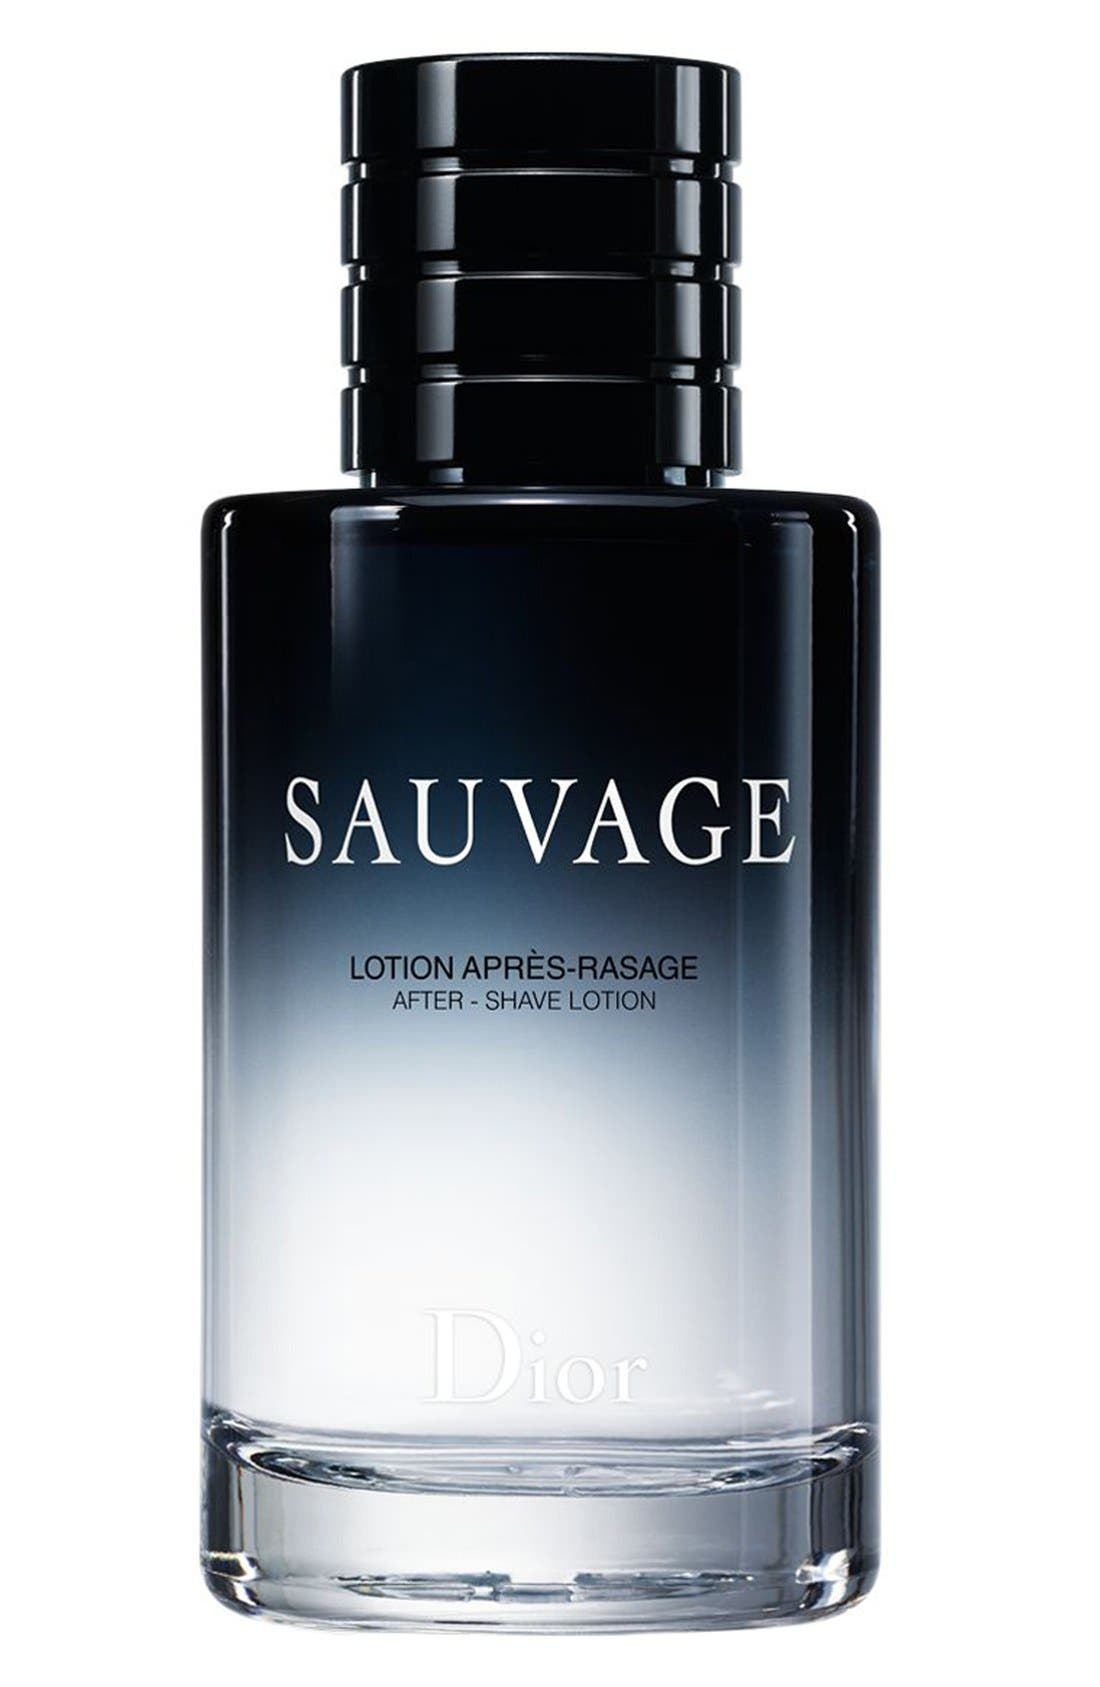 Dior Sauvage After-Shave Lotion | Nordstrom